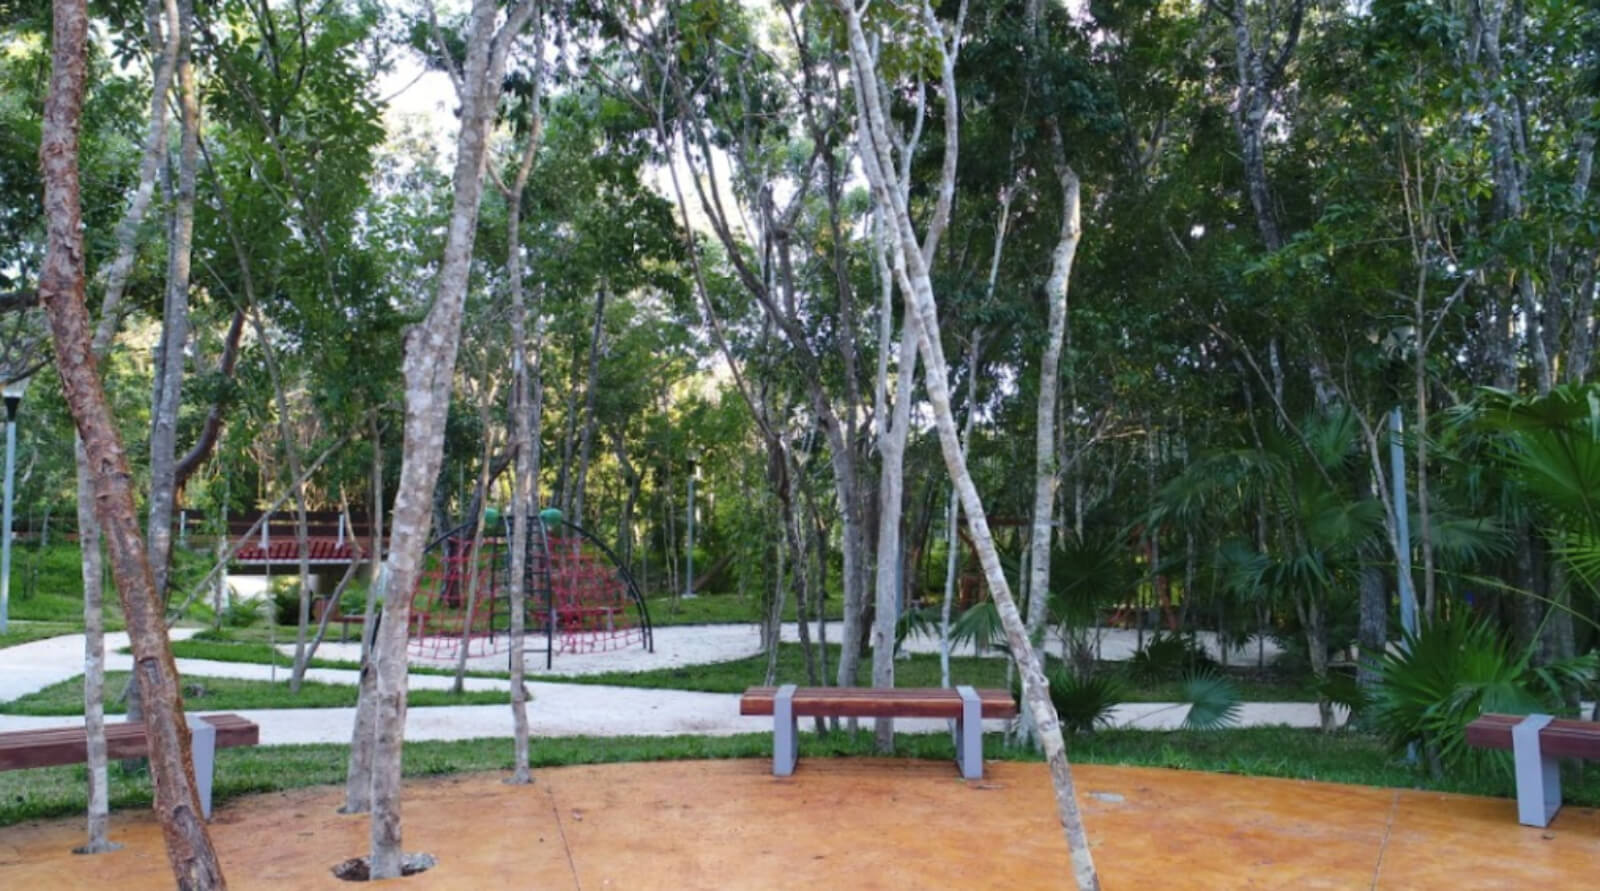 Lot in gated community with clubhouse, sports courts, pool, dog area and more for sale Playa del Carmen.